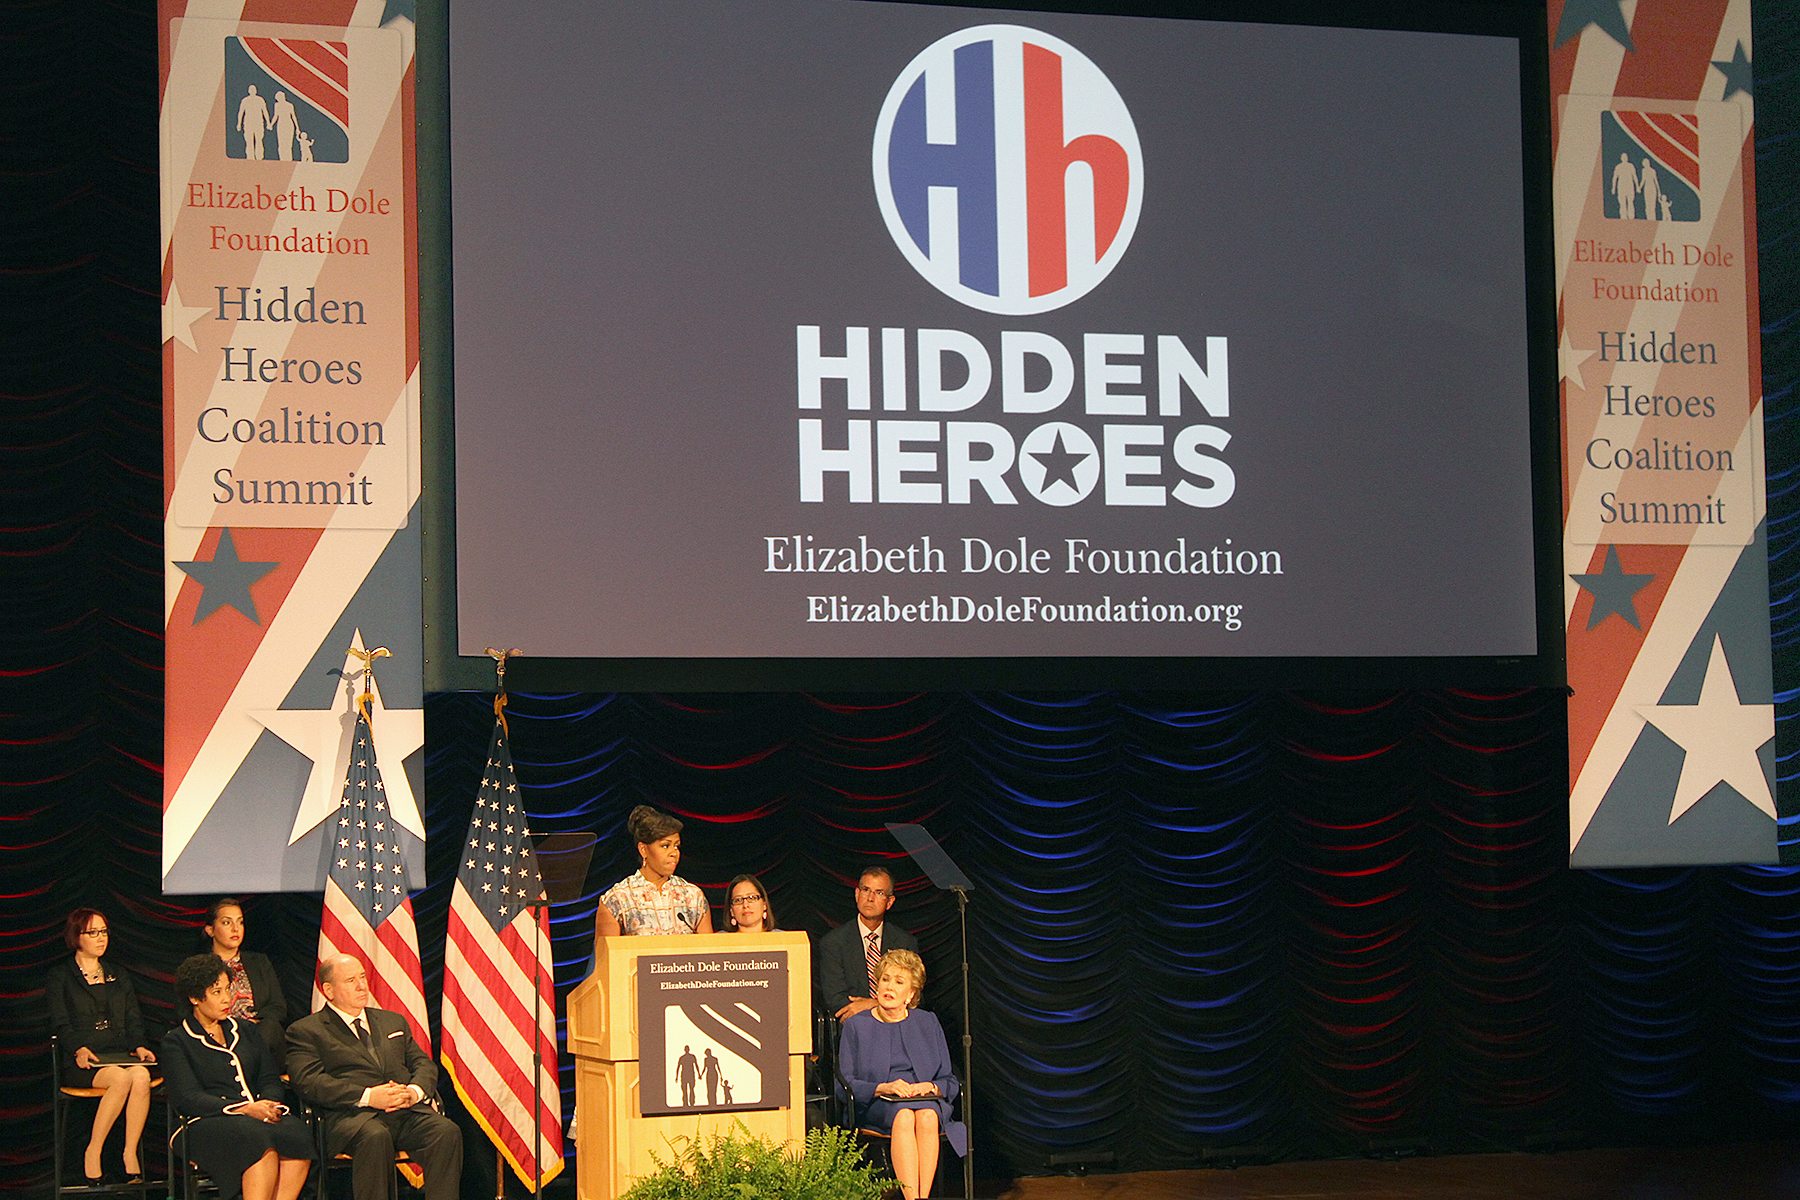 Michelle Obama speaking at a Hidden Heroes conference